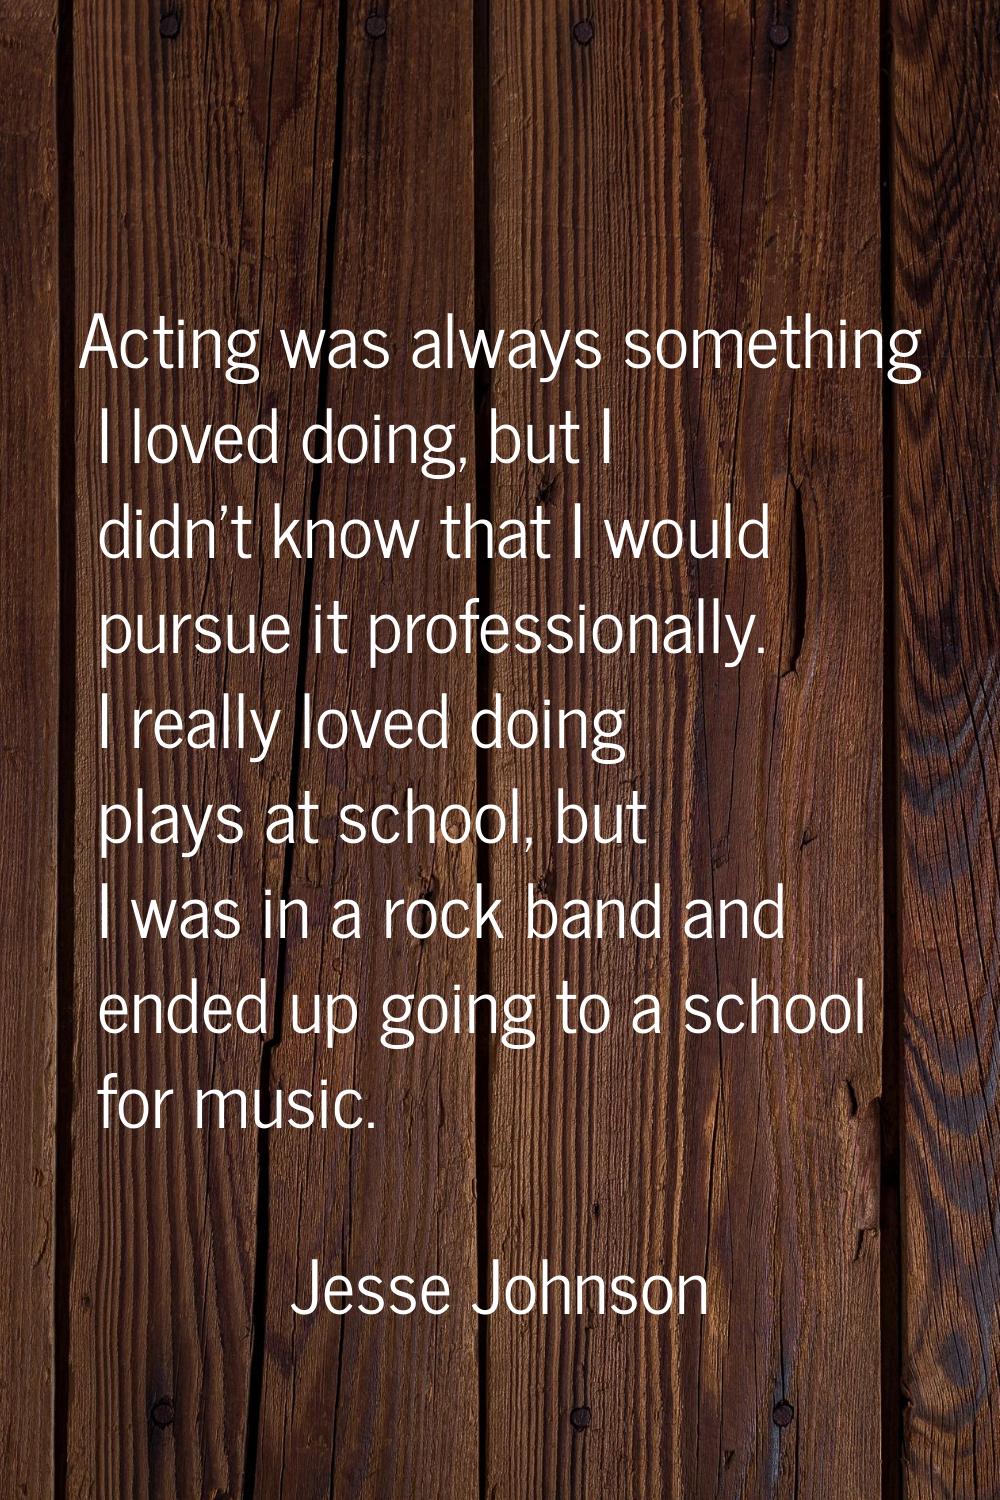 Acting was always something I loved doing, but I didn't know that I would pursue it professionally.